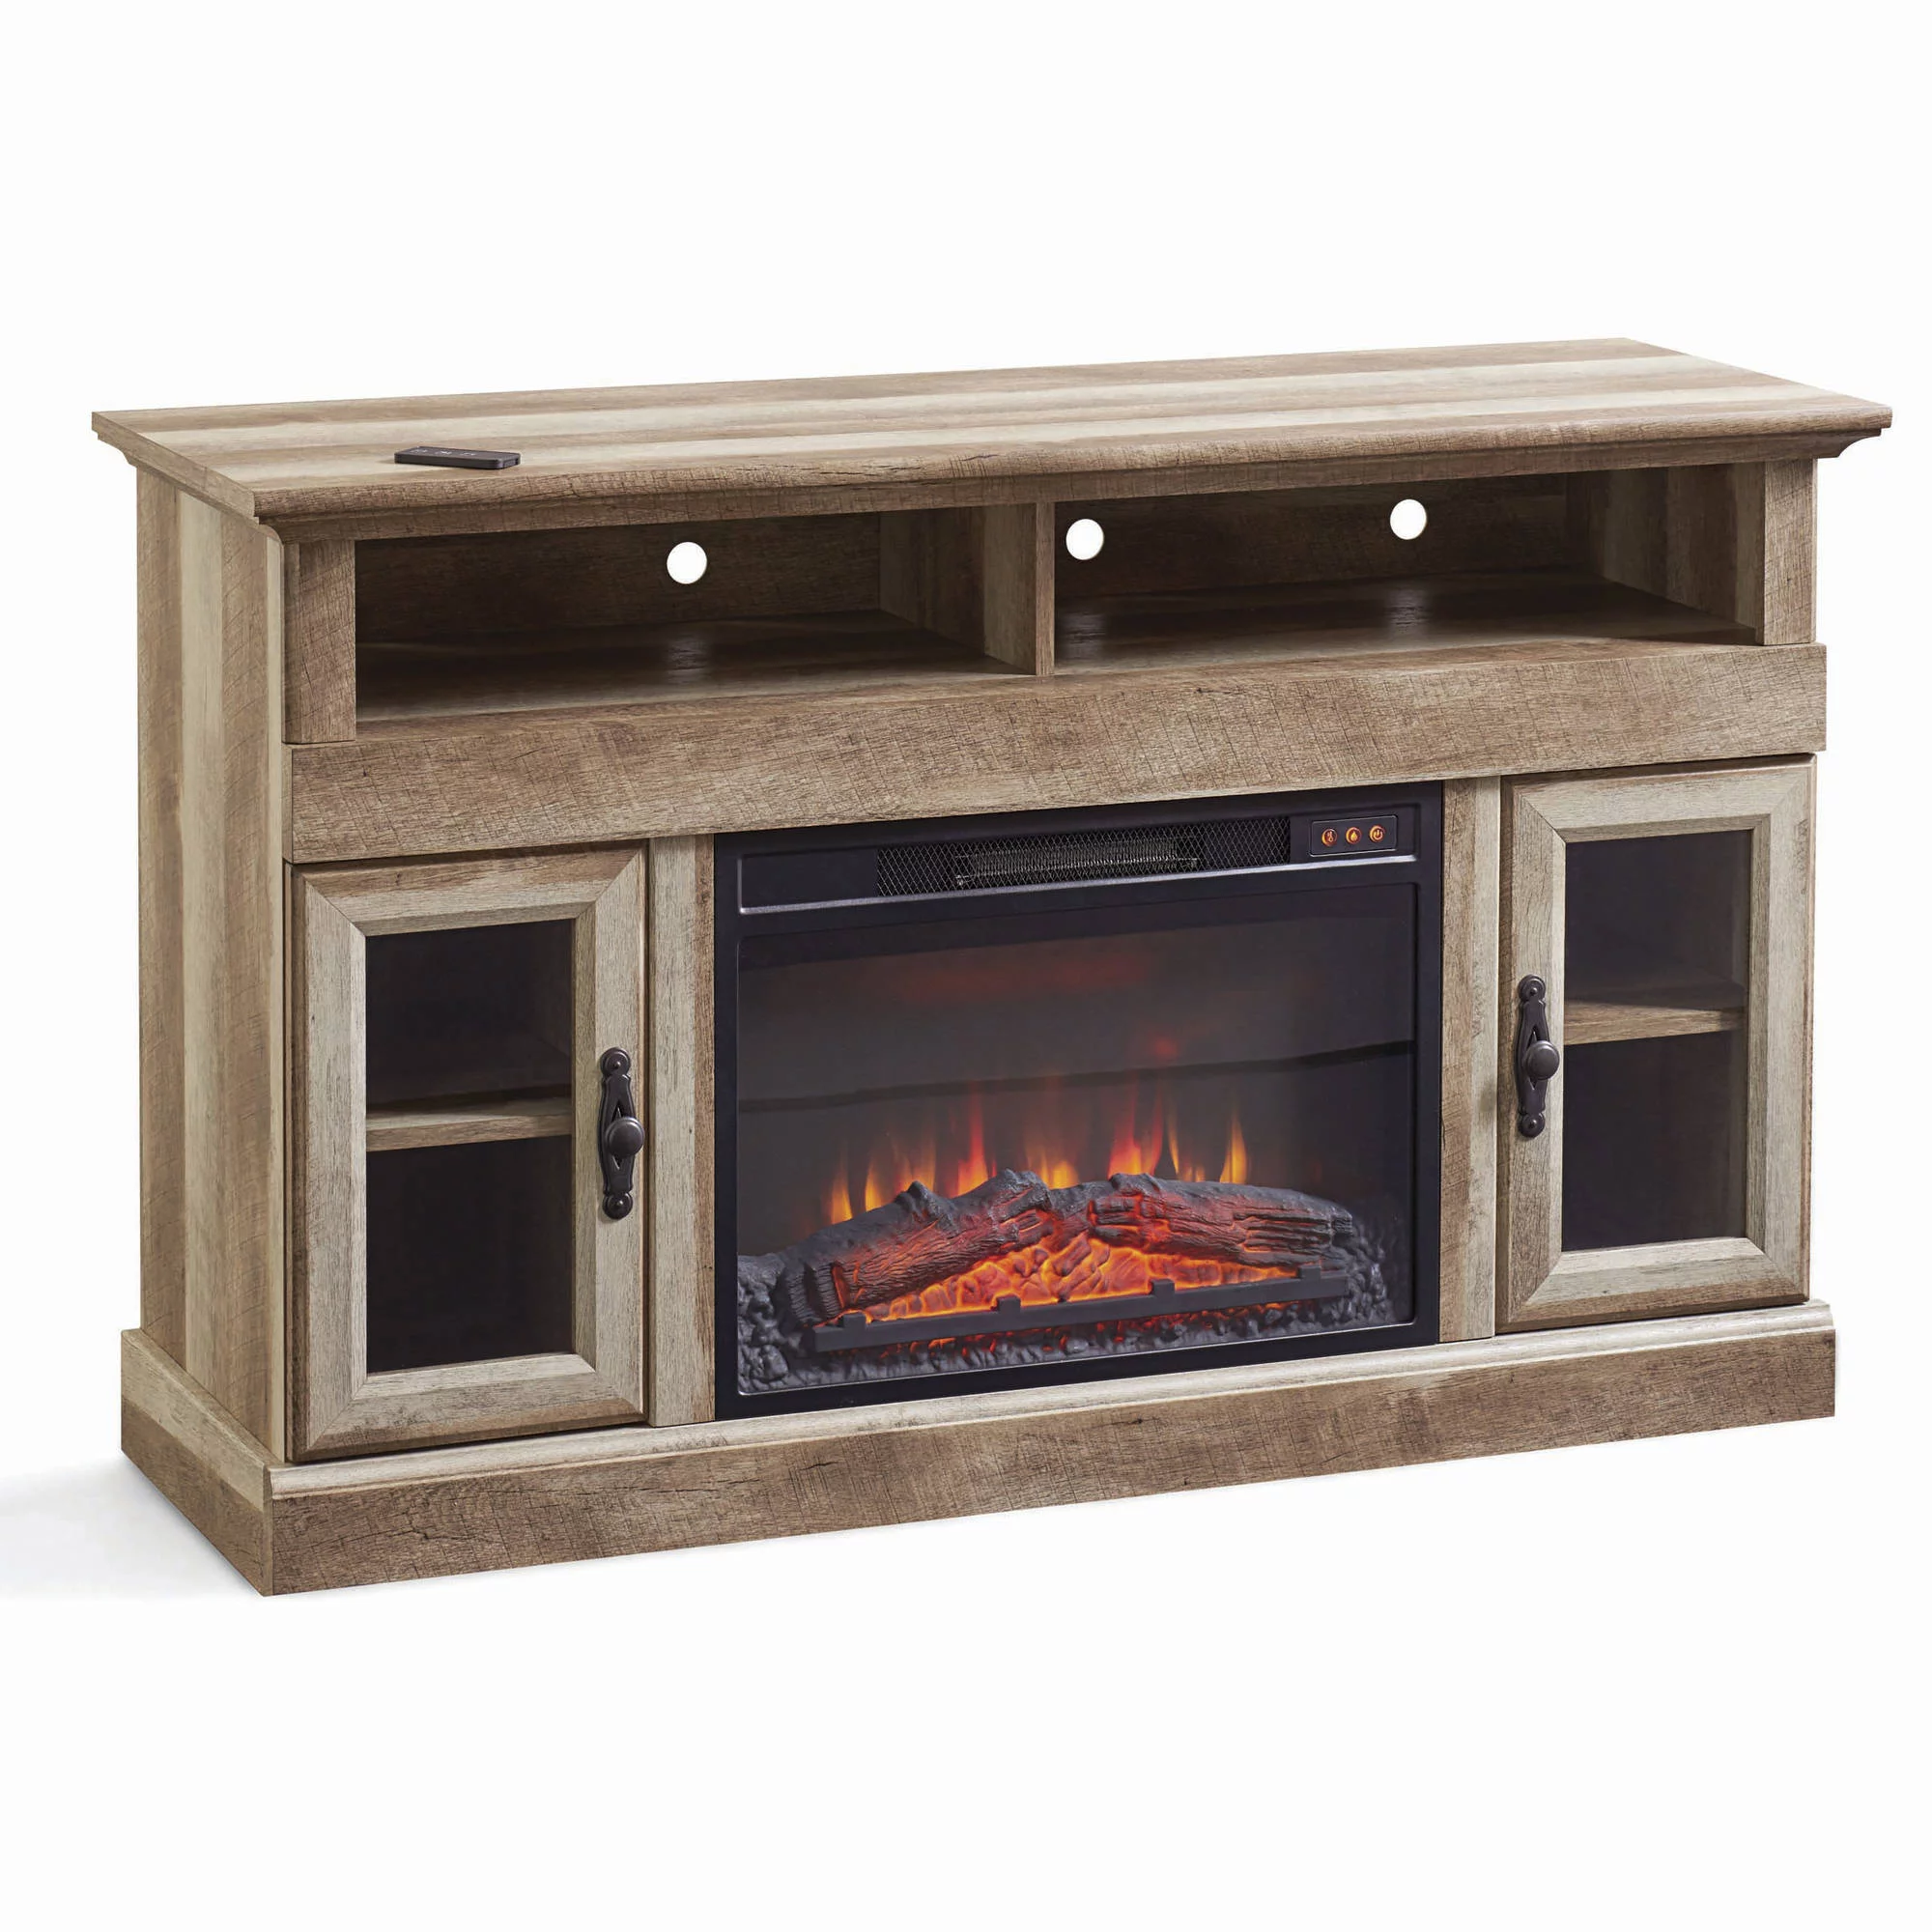 Better Homes & Gardens Crossmill Fireplace Media Console, for TVs up to 60", Weathered Pine Finish